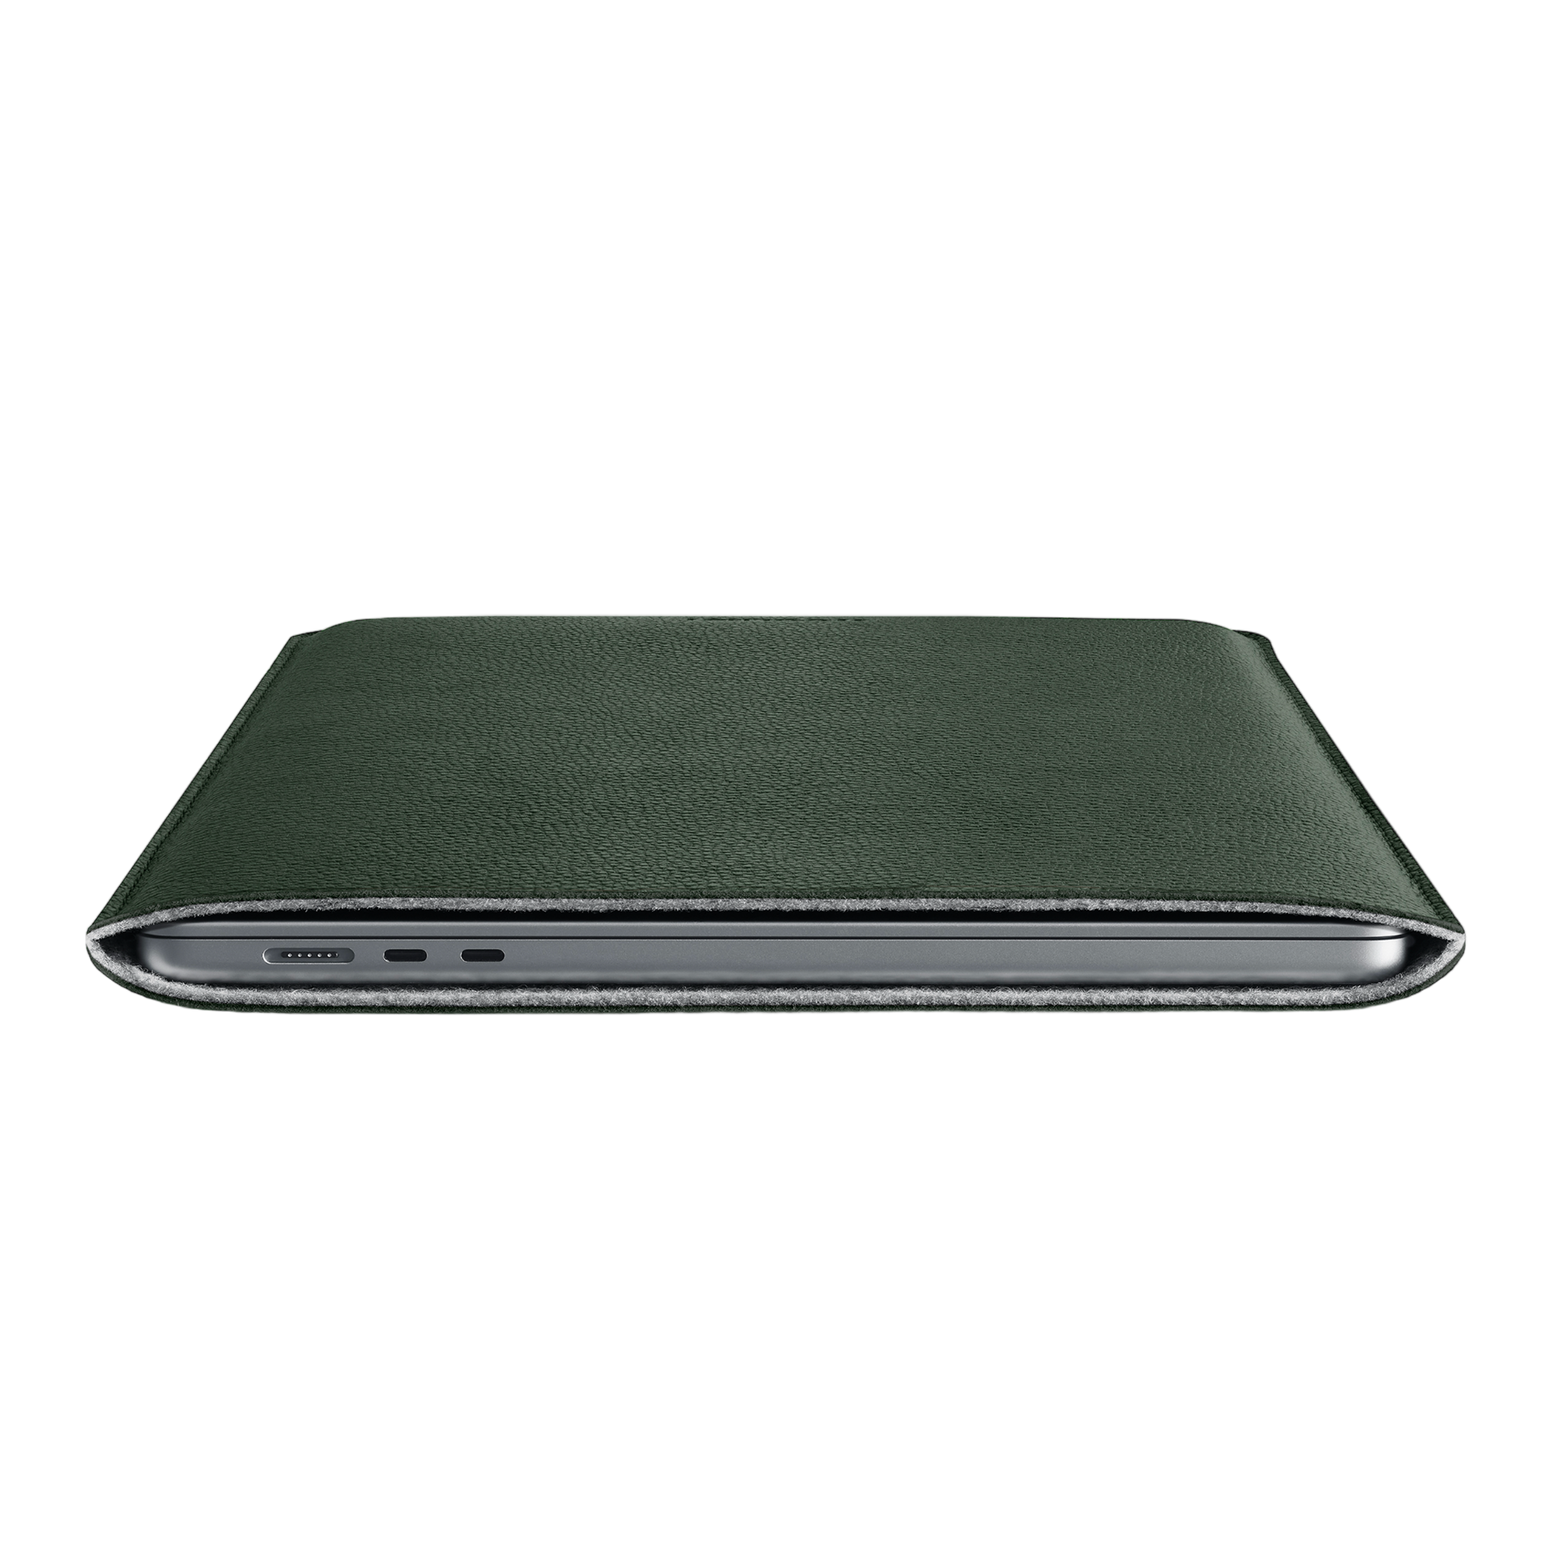 WOOLNUT Leather Sleeve for 15-Inch MacBook Air - Green